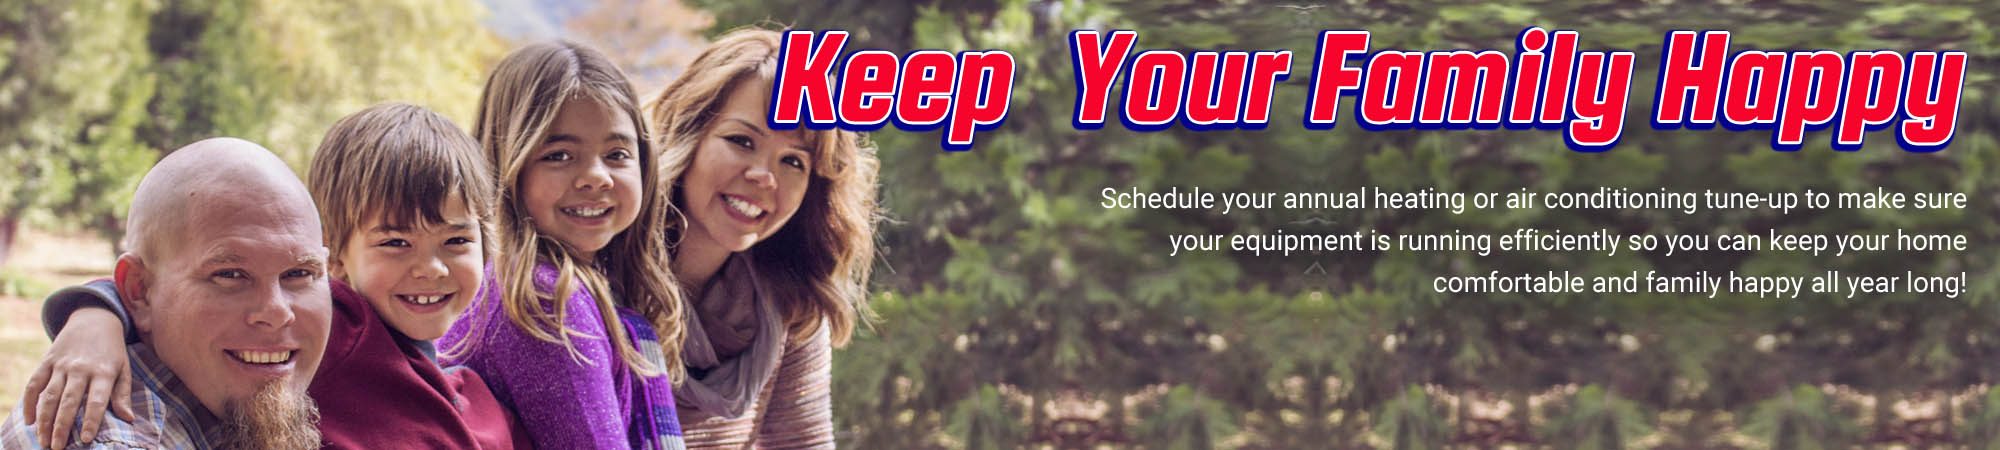 Schedule Air Conditioner tune-up with Sooner Heating and Air, LLC of Tonkawa OK.